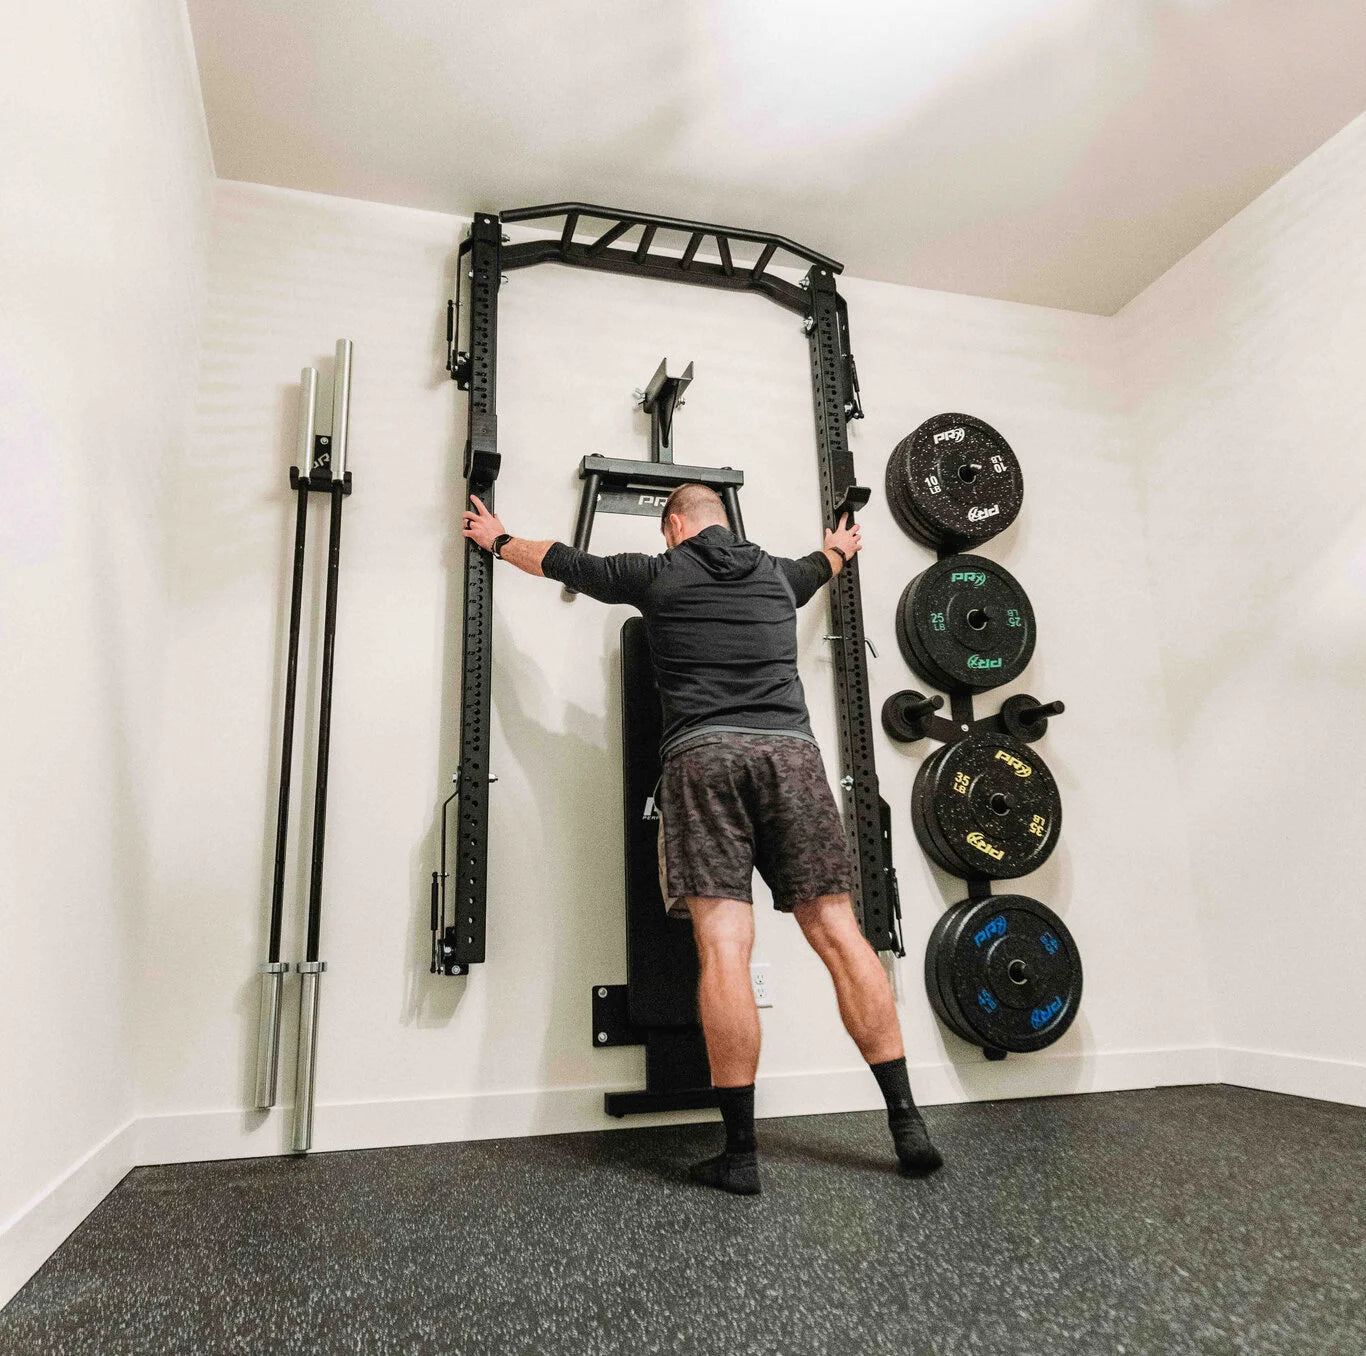 Cheap Fitness Equipment in the Workout For Less Sale with Big